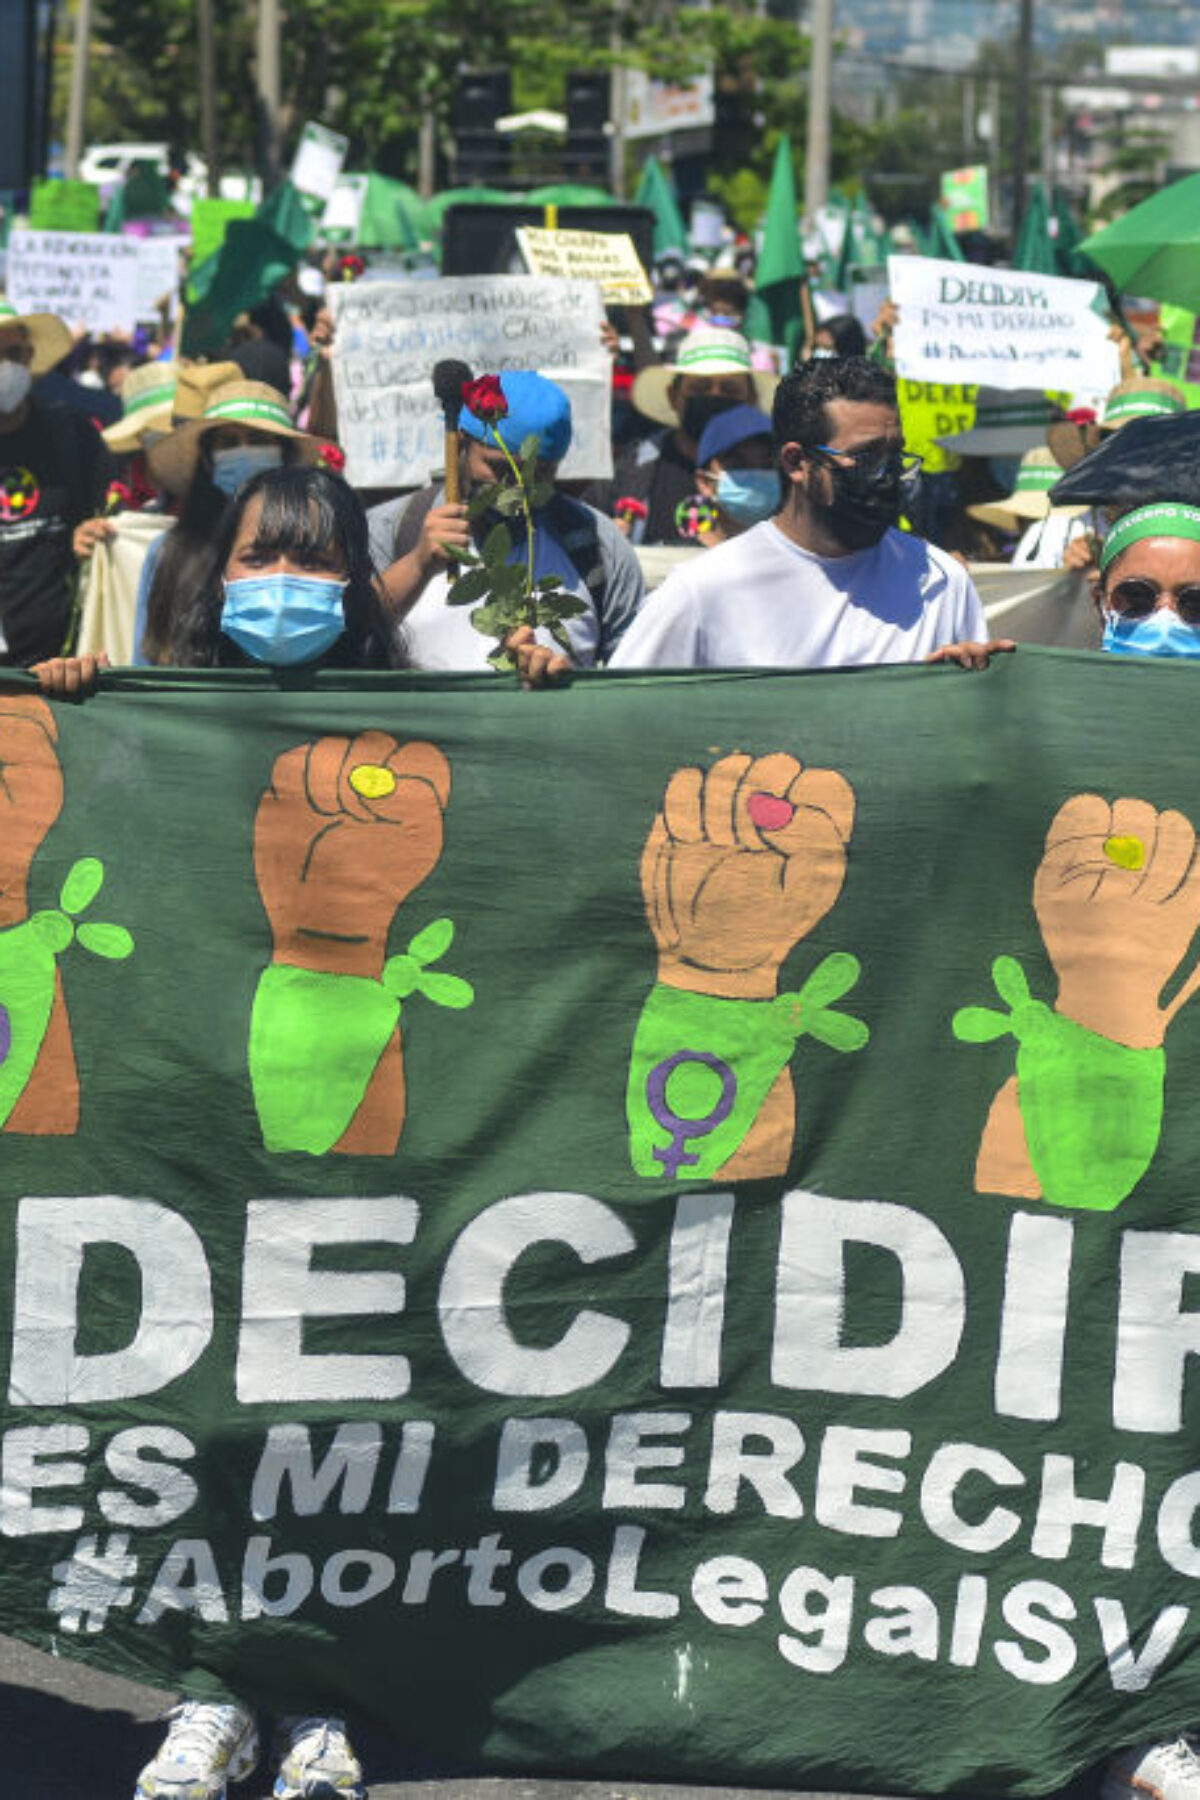 SAN SALVADOR, EL SALVADOR - SEPTEMBER 28: Women hold signs and chant slogans as they march to the Legislative Assembly during a demonstration to demand legal abortion on September 28, 2021 in San Salvador, El Salvador. President of El Salvador, Nayib Bukele, withdrew from the constitutional reform proposal, drawn up by his government, legalizing therapeutic abortion and same-sex marriage. (Photo by Roque Alvarenga/APHOTOGRAFIA/Getty Images)